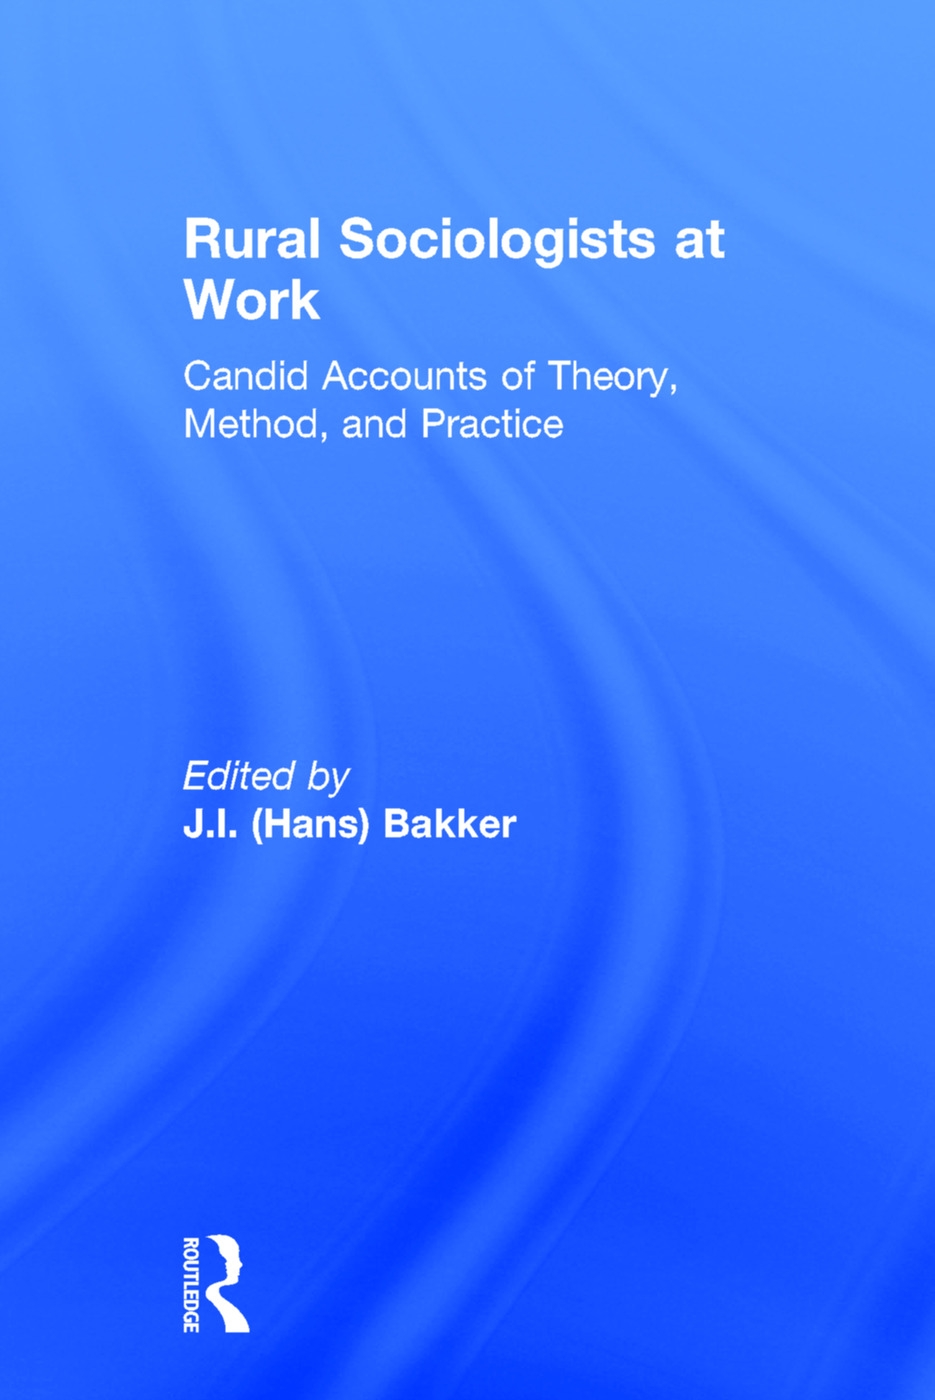 Rural Sociologists at Work: Candid Accounts of Theory, Method, and Practice